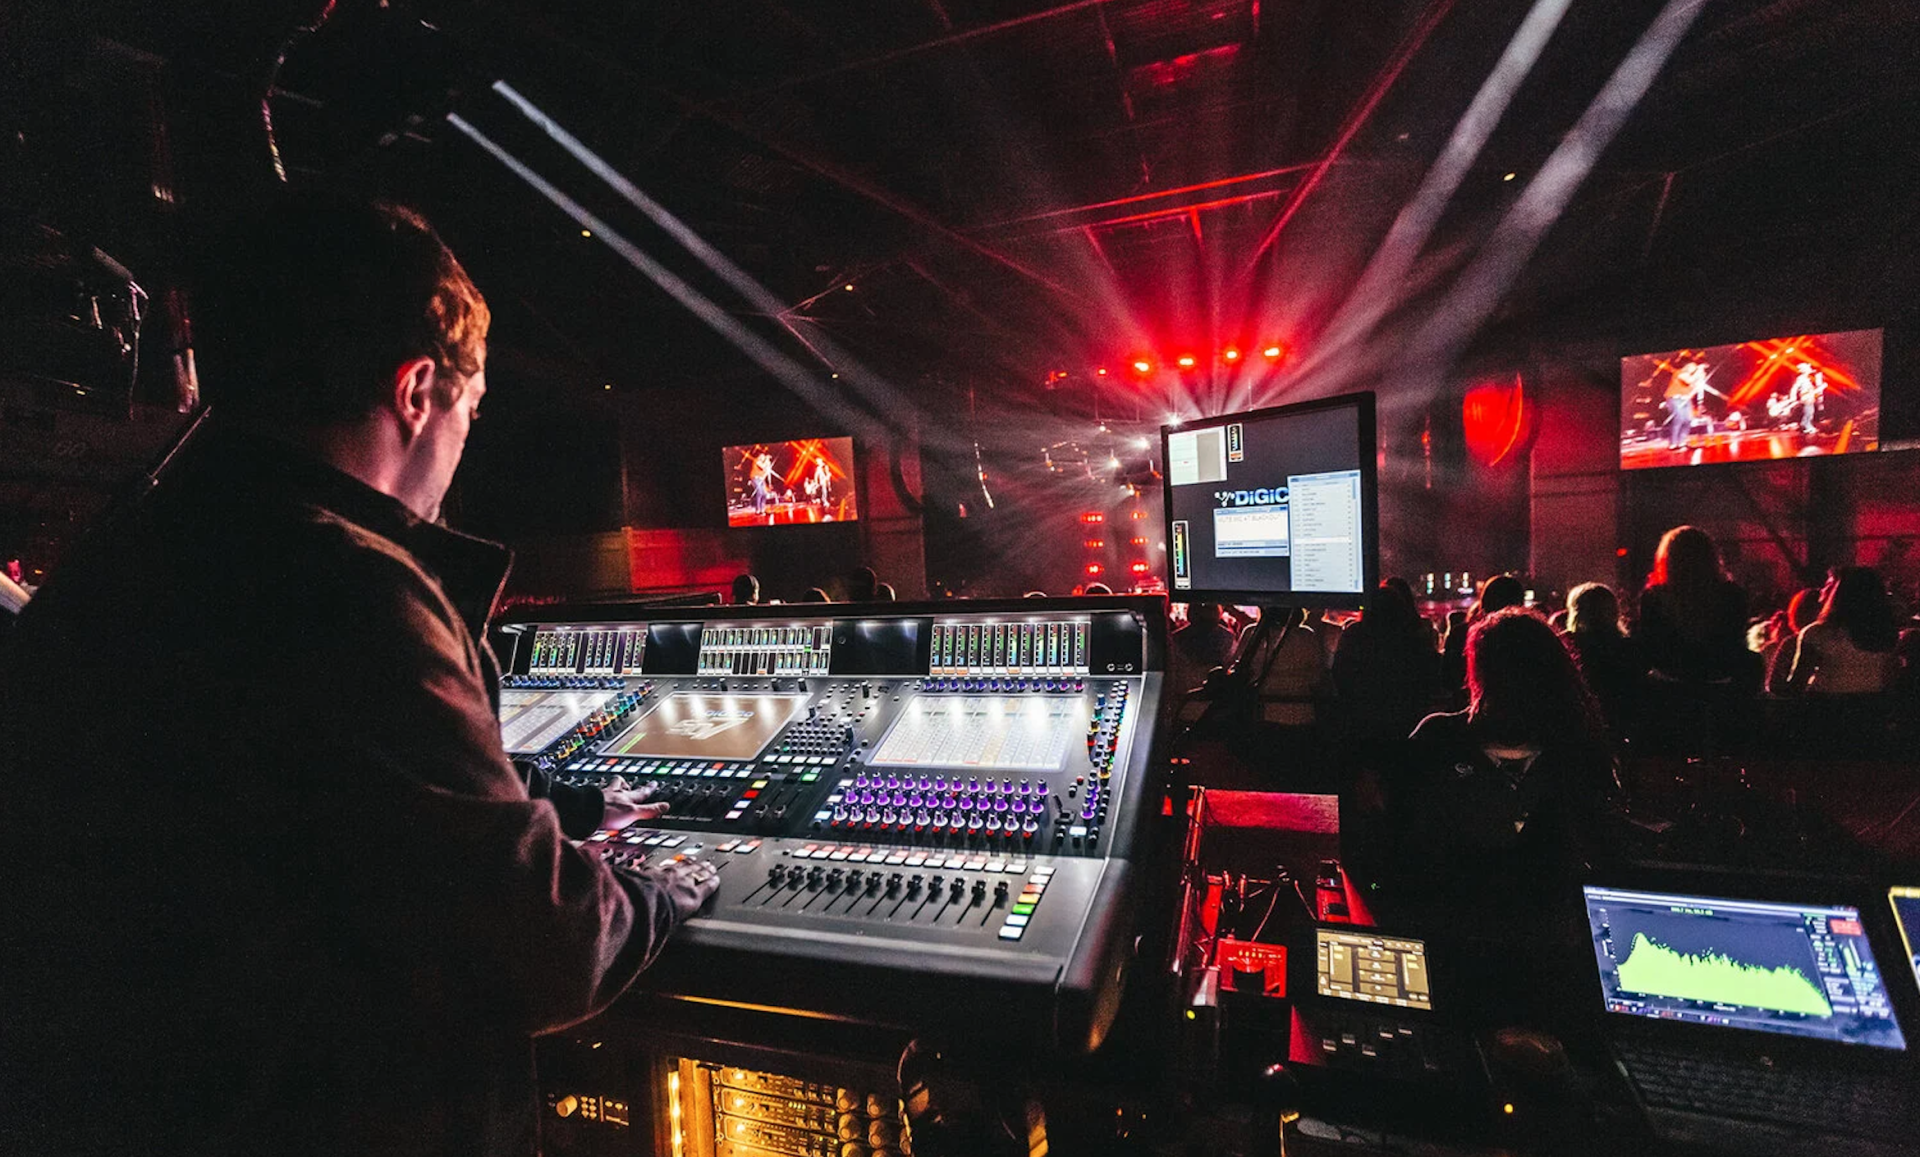 Get to know this local family responsible for all sound and lighting at Summerfest